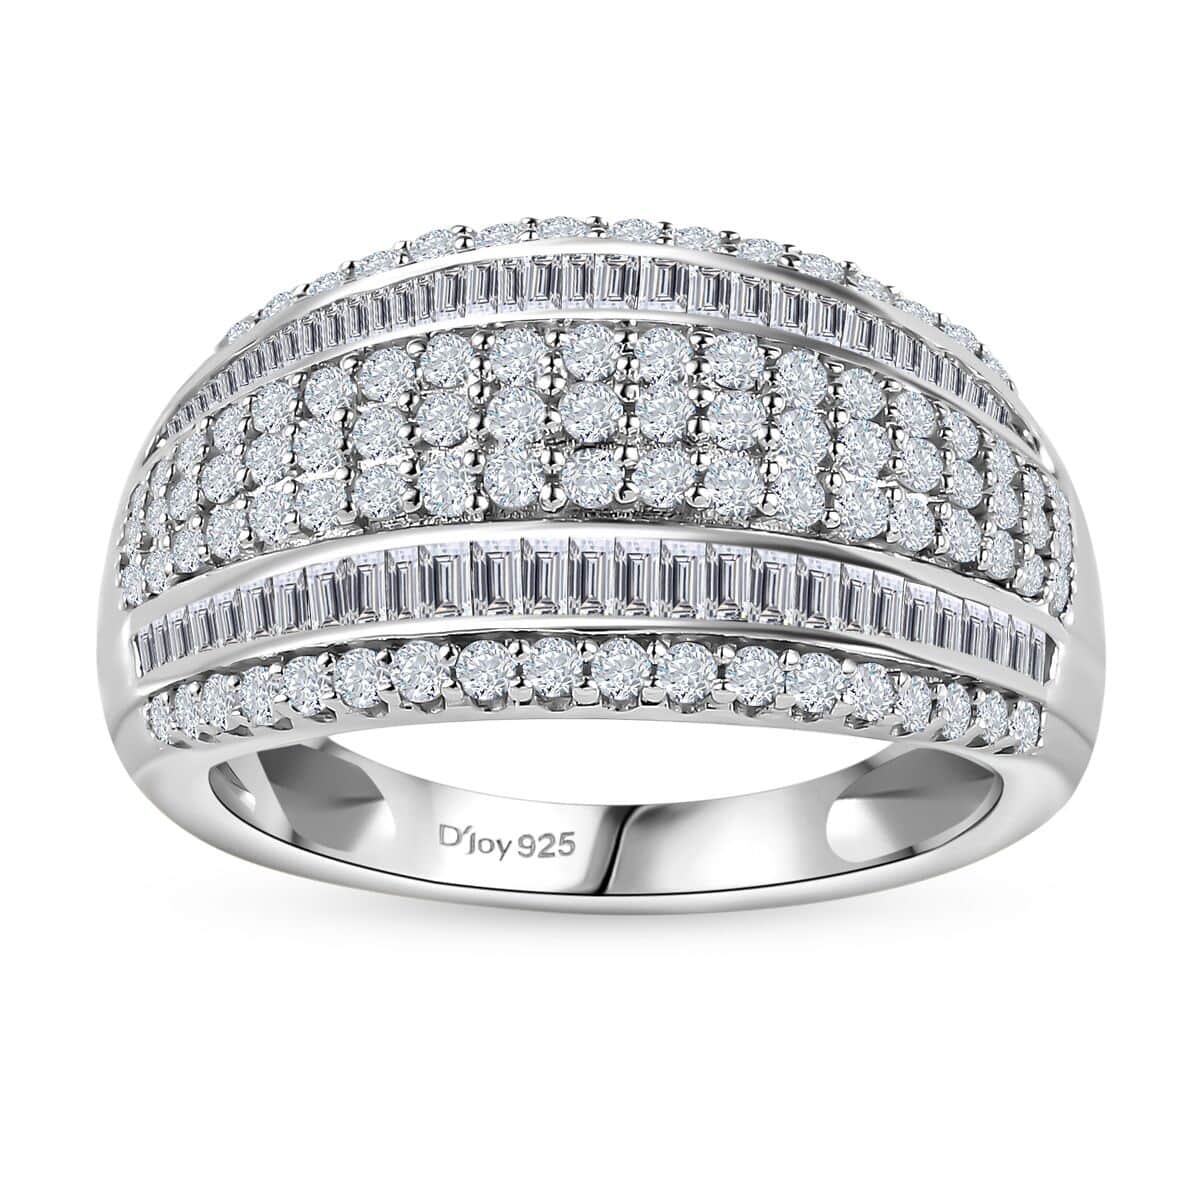 Buy Diamond Multi Row Ring in Platinum Over Sterling Silver (Size